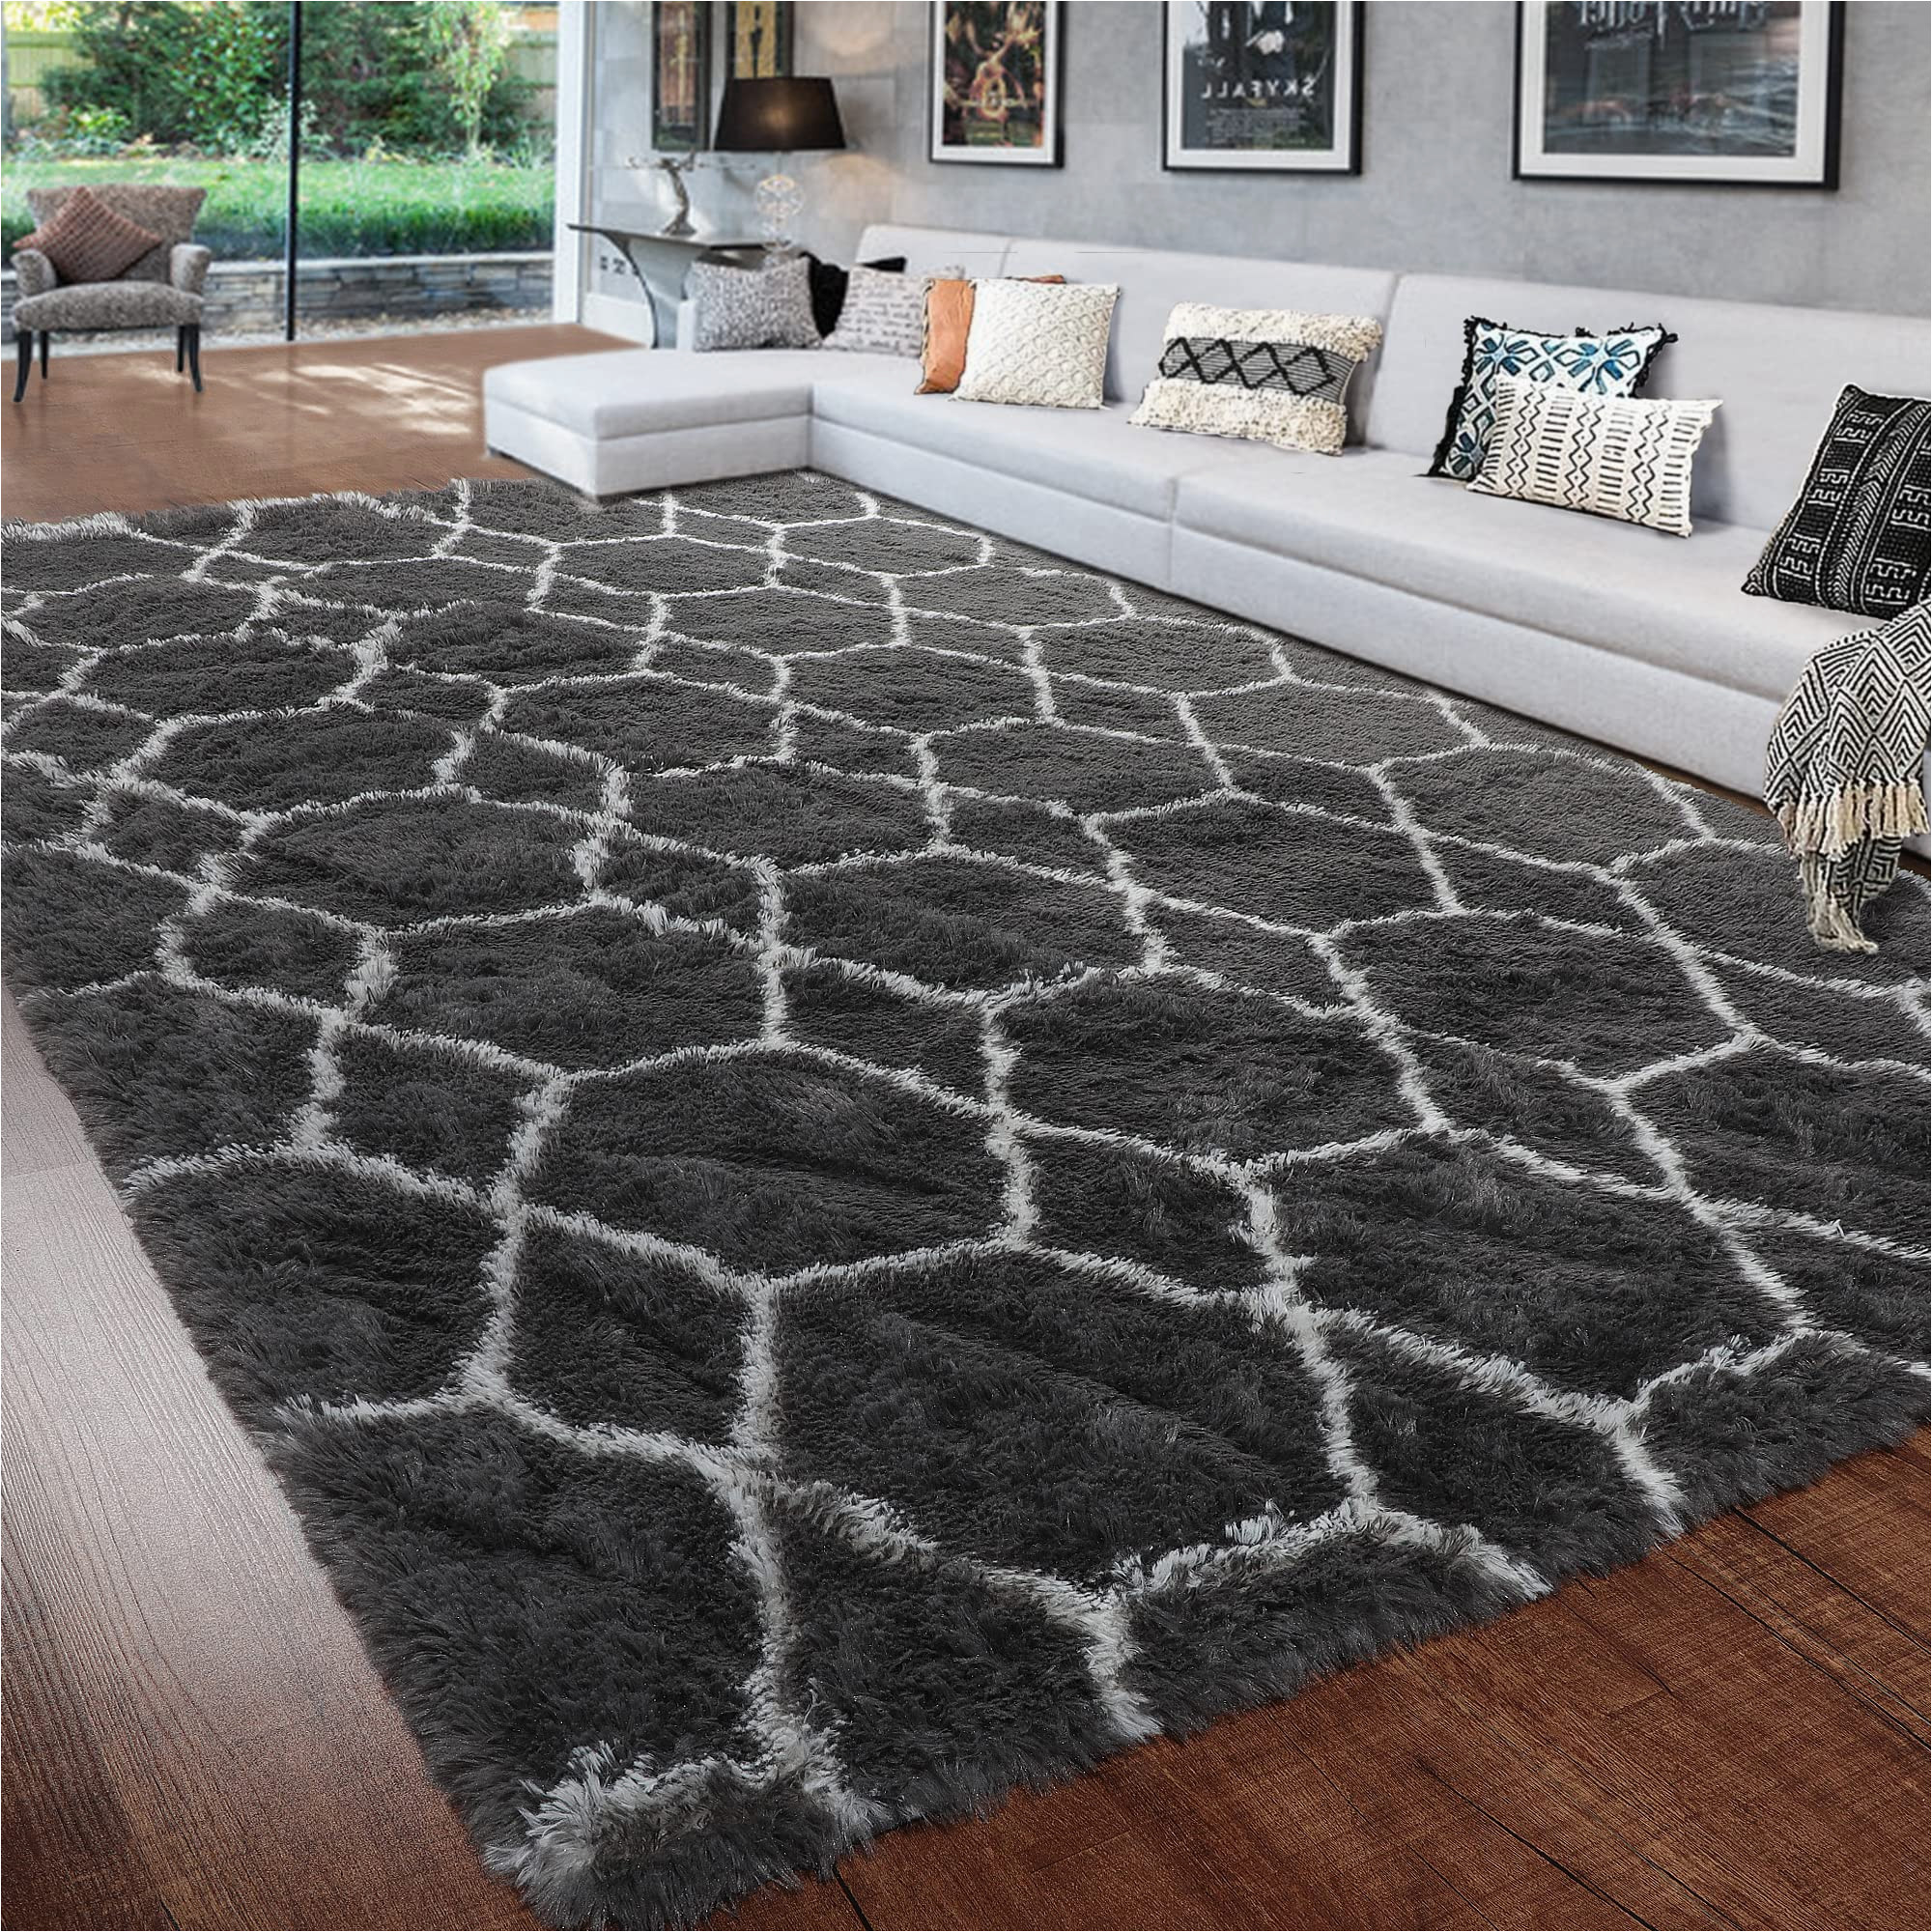 Bedroom Rugs Bed Bath Beyond Bstluv Large Modern Shag Rugs for Bedroom,6×9 area Rug,soft Plush Geometric Carpet,big Shaggy Fluffy Rugs for Living …